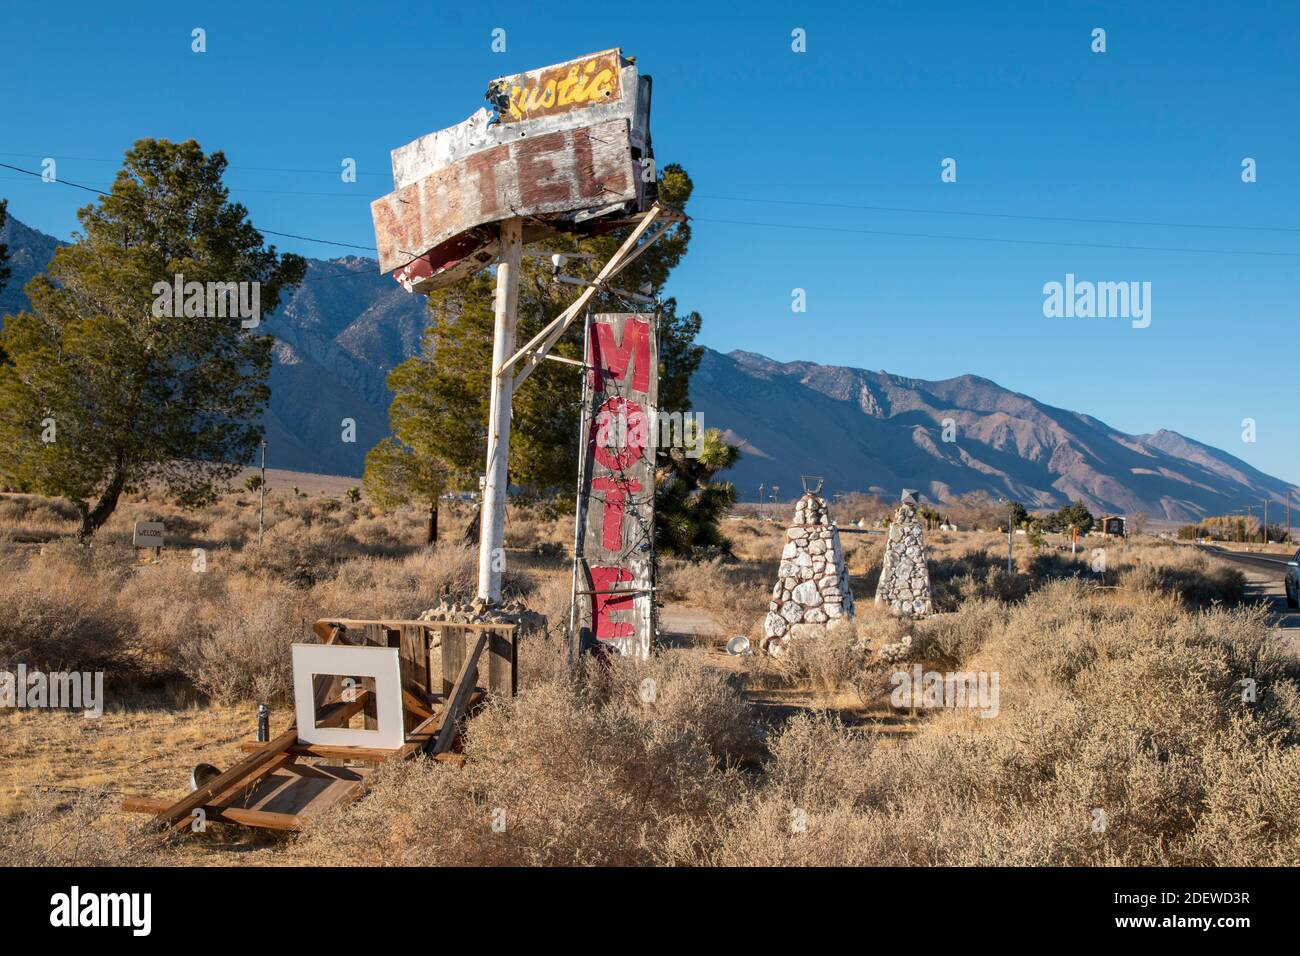 Olancha is a small town in Inyo County, California, famous for being close to Death Valley National Park. It has several buildings in disrepair. Stock Photo